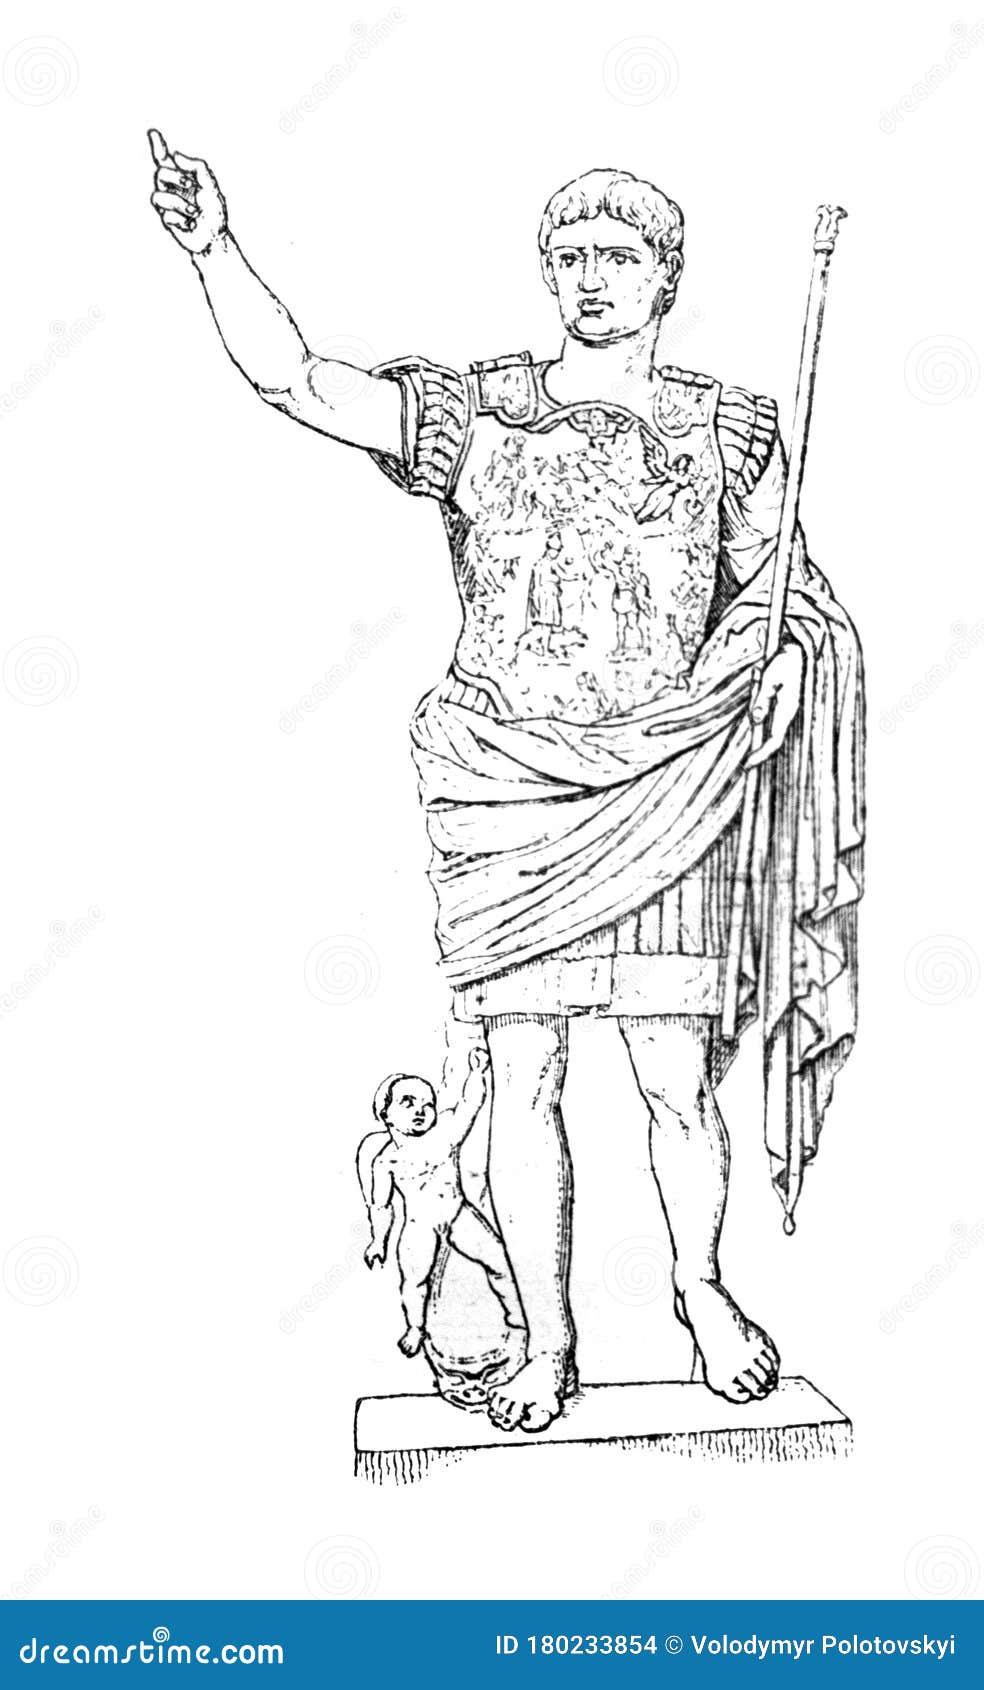 imperor augustus in the old book meyers lexicon, vol. 2, 1897, leipzig